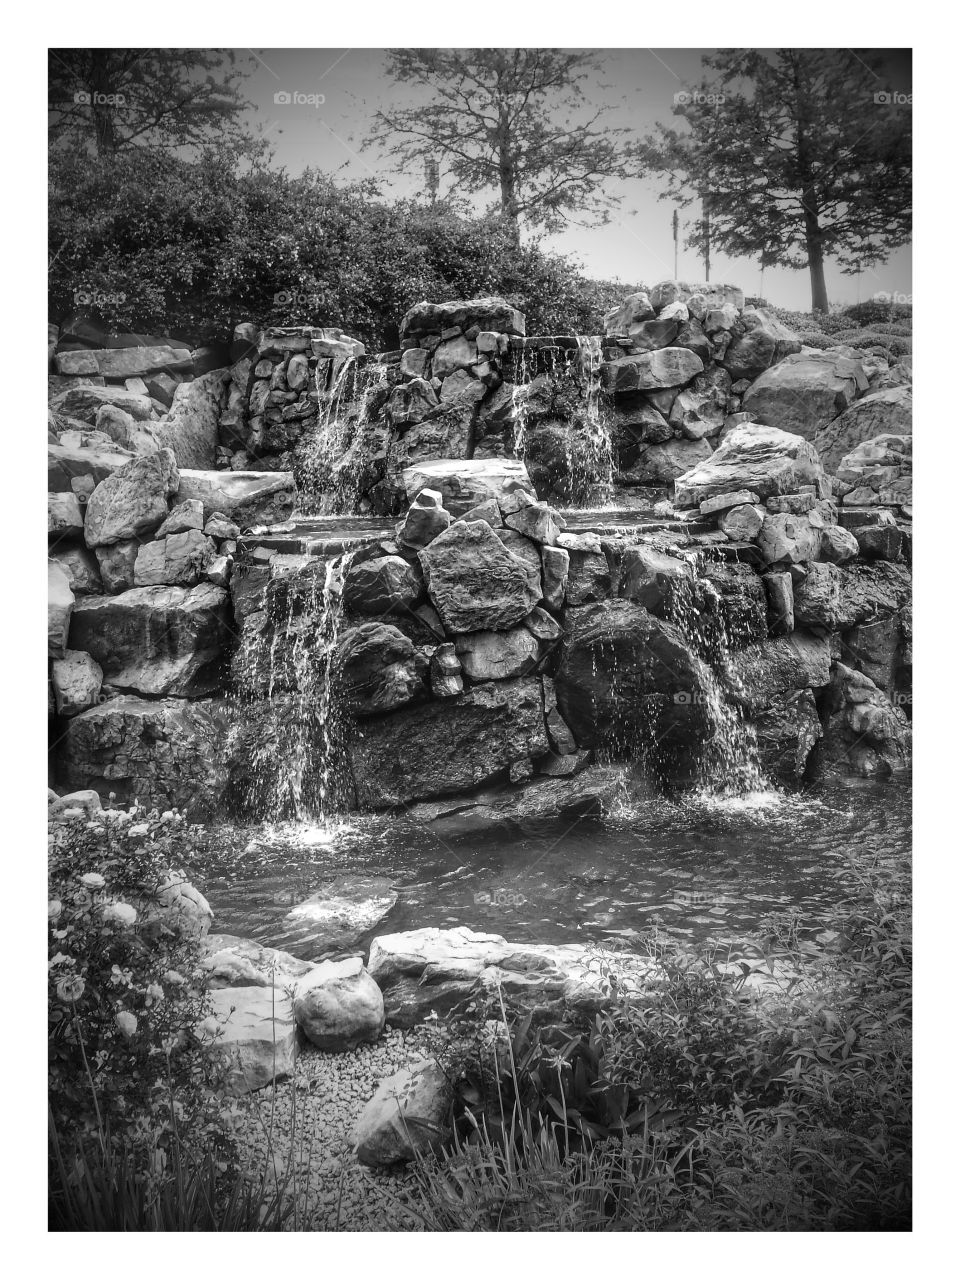 hillcrest black and white. waterfalls at hillcrest hospital, waco has lots of hidden treasures